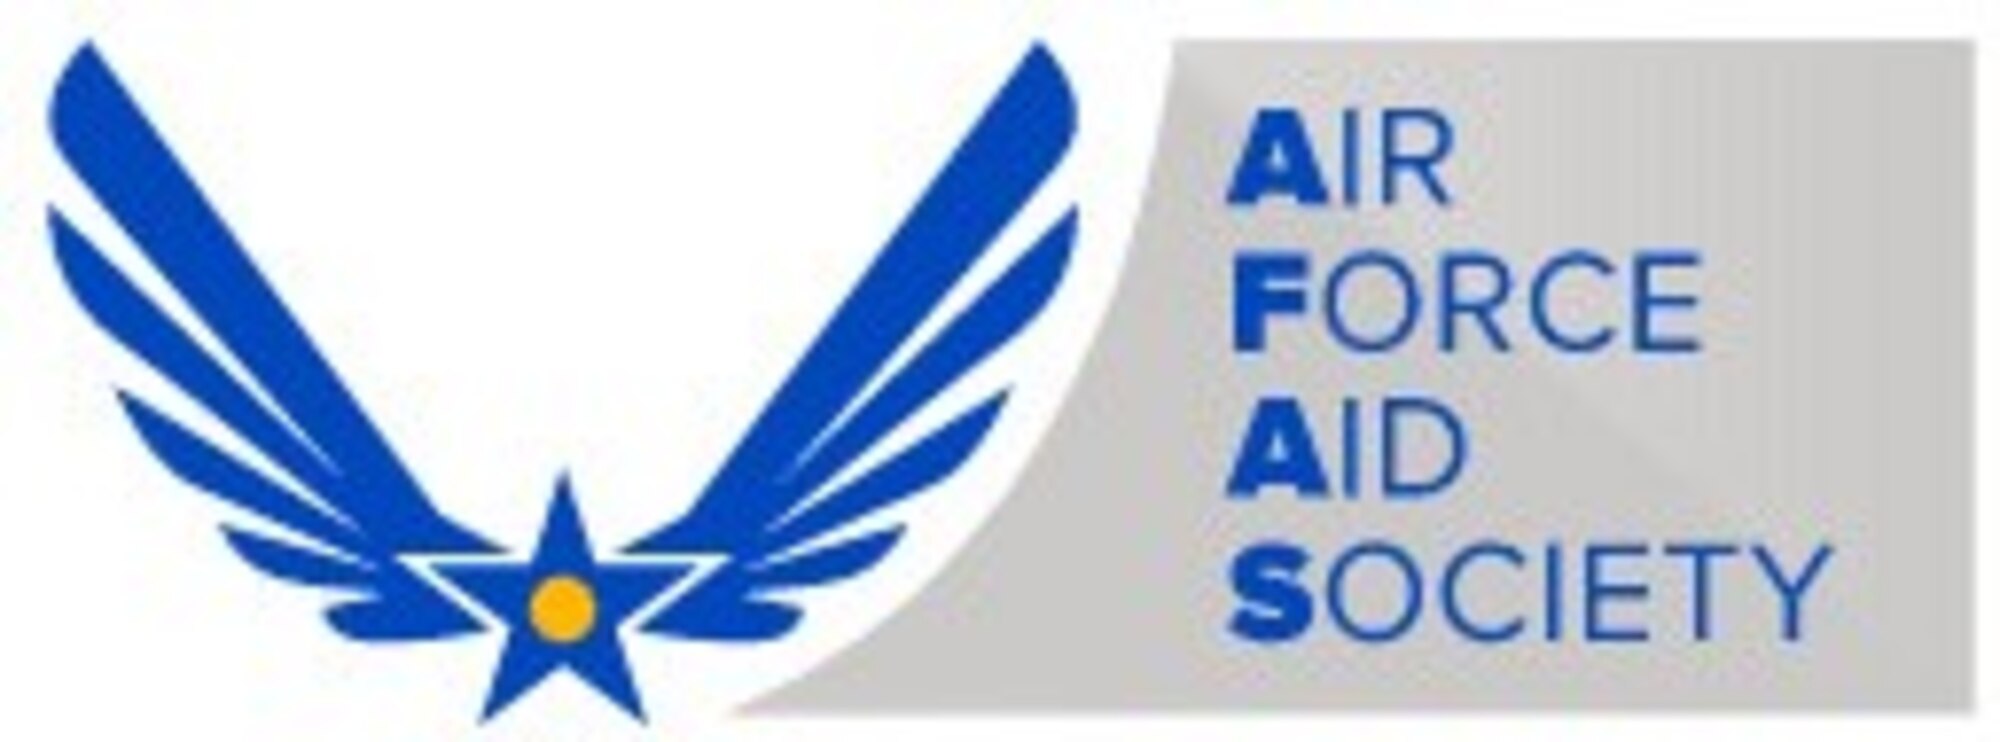 Air Force Aid Society Graphic